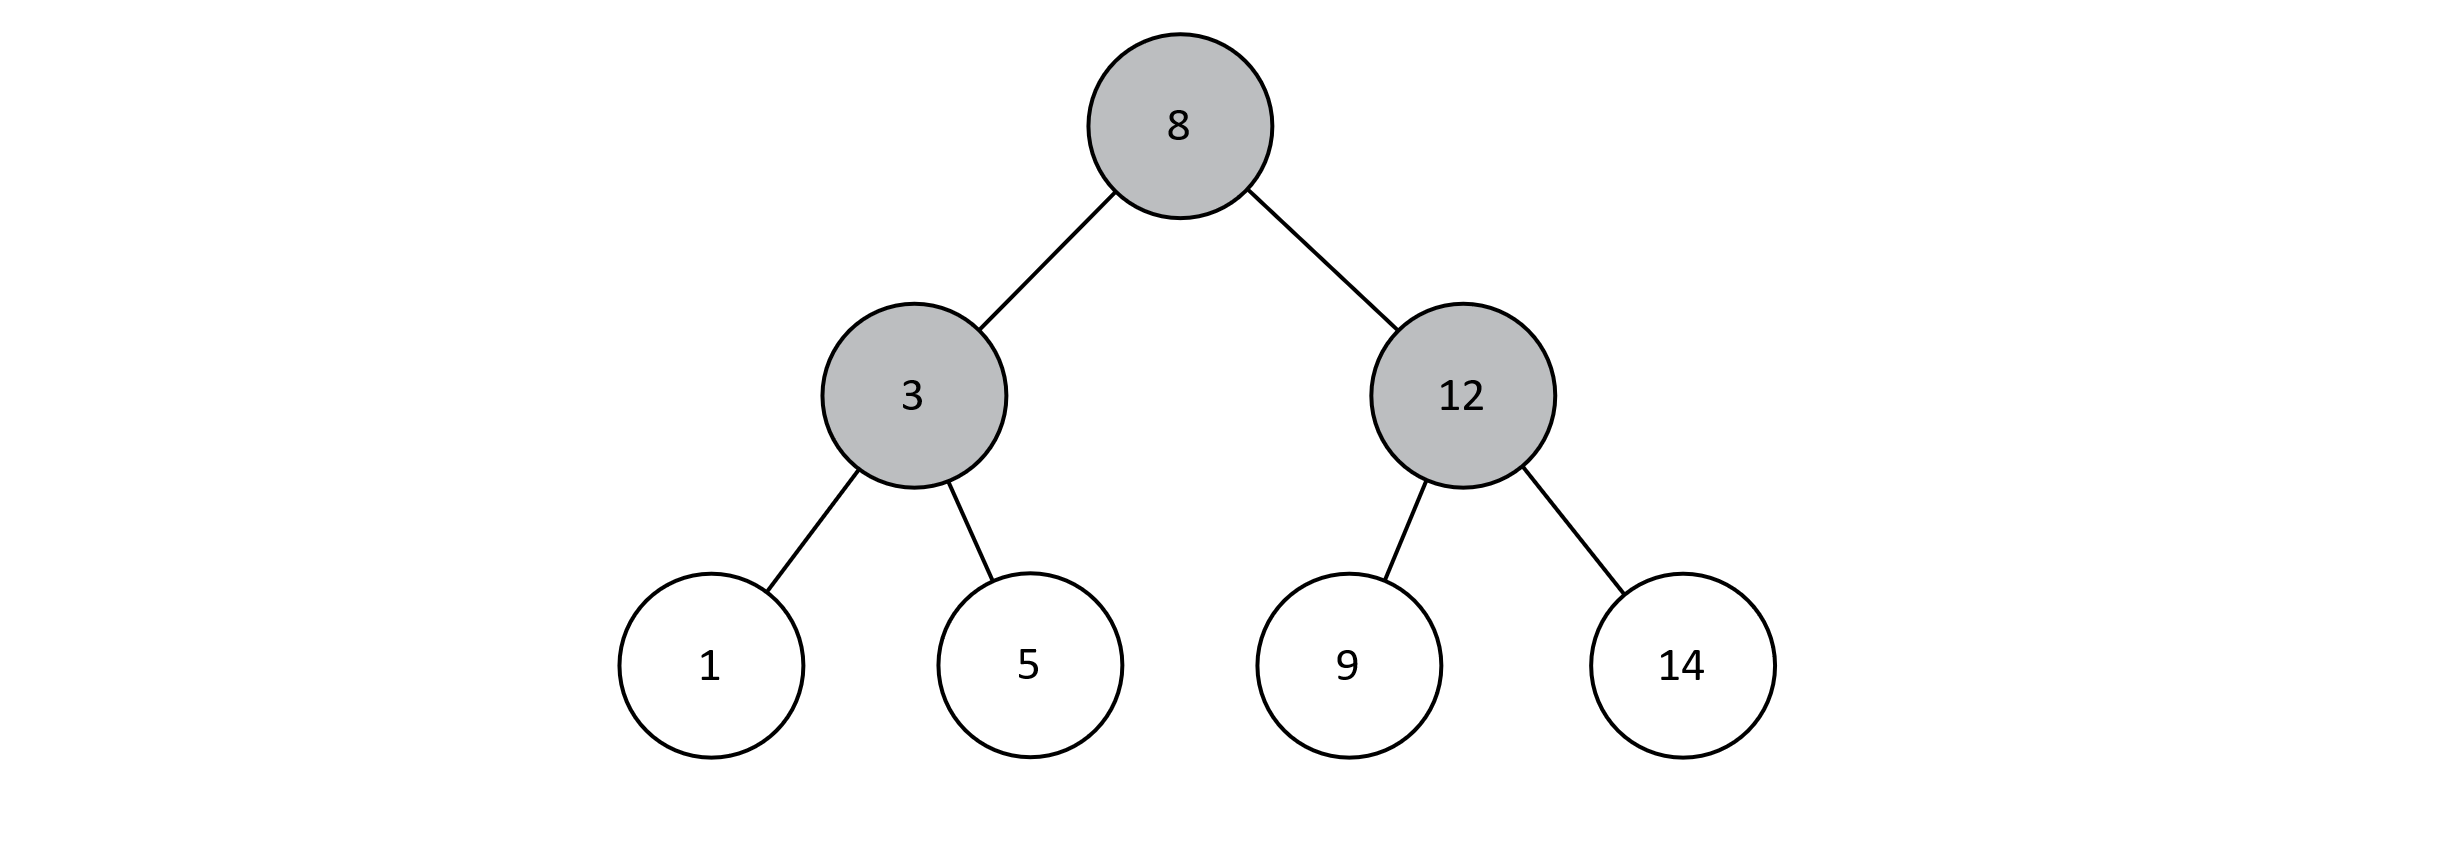 A complete binary search tree with 7 nodes.